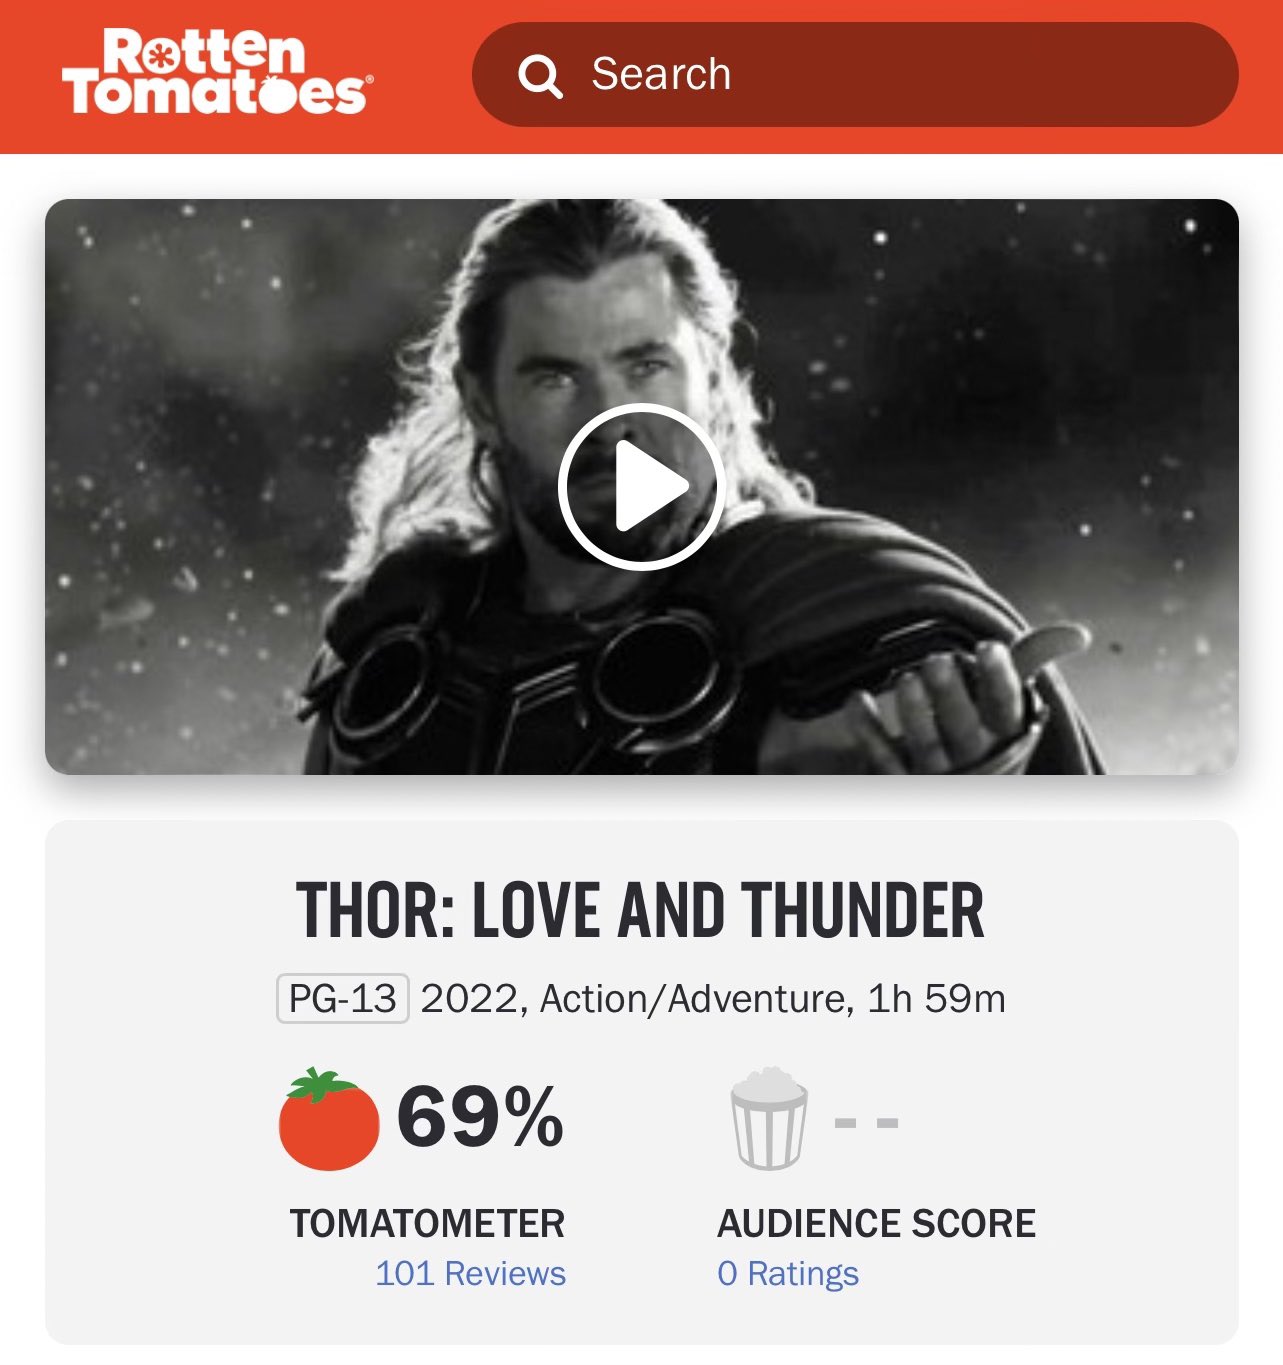 Rotten Tomatoes - The 'Thor: Love and Thunder' press tour